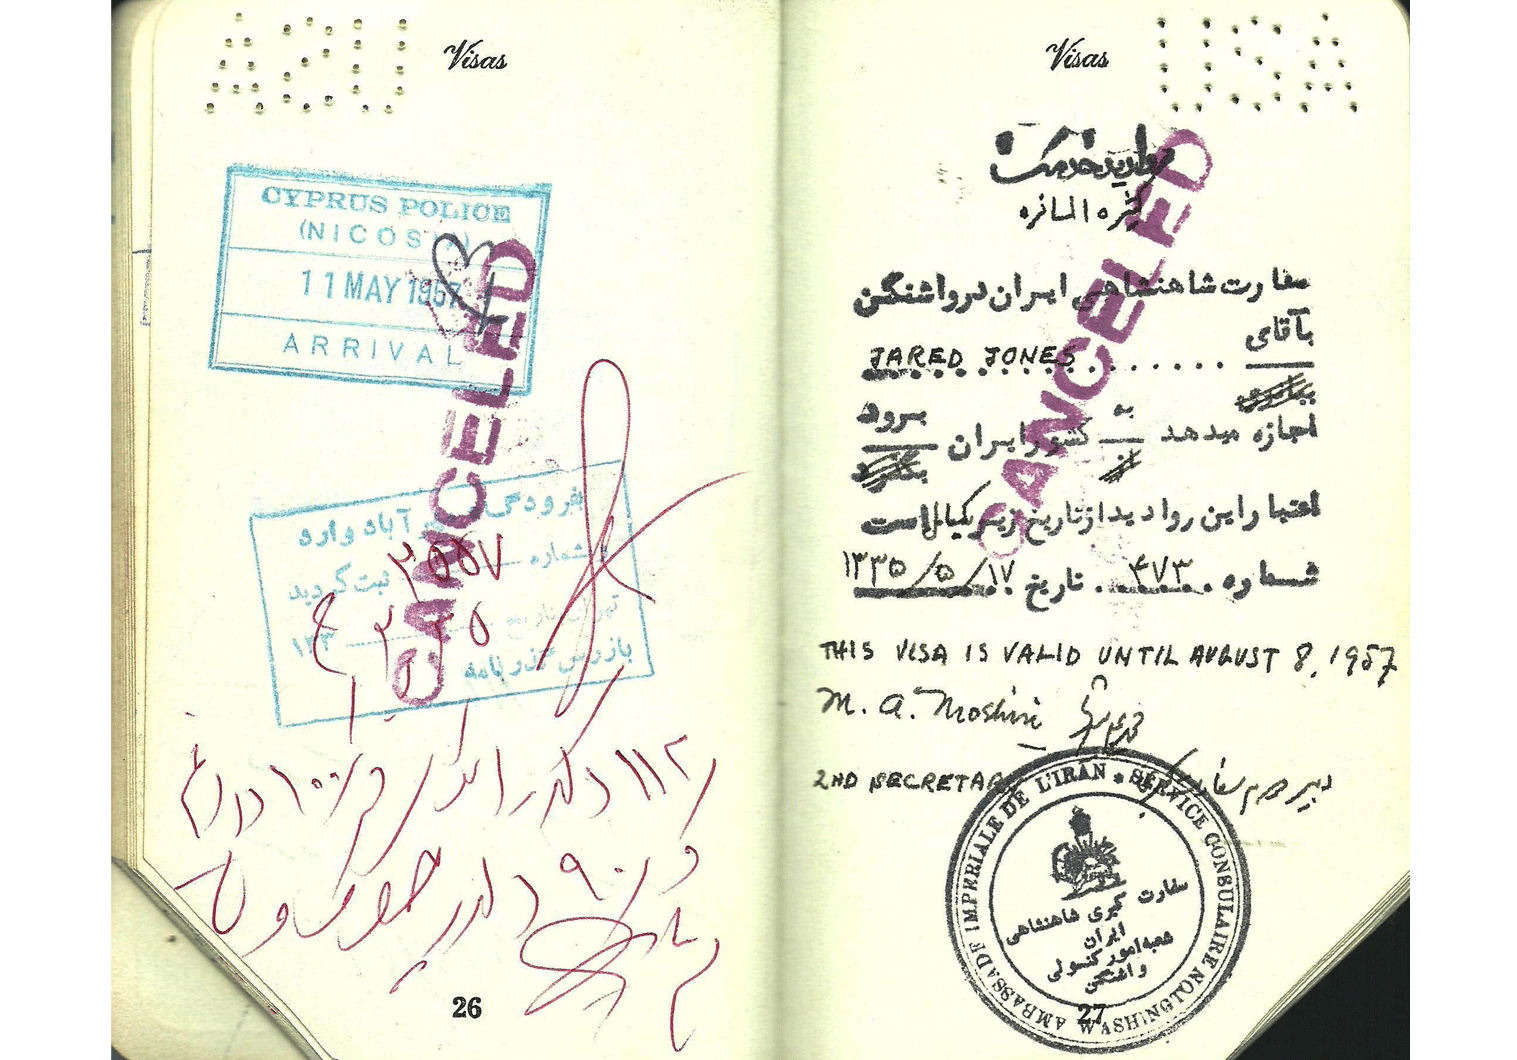 A passport with a visa that you will NOT see today